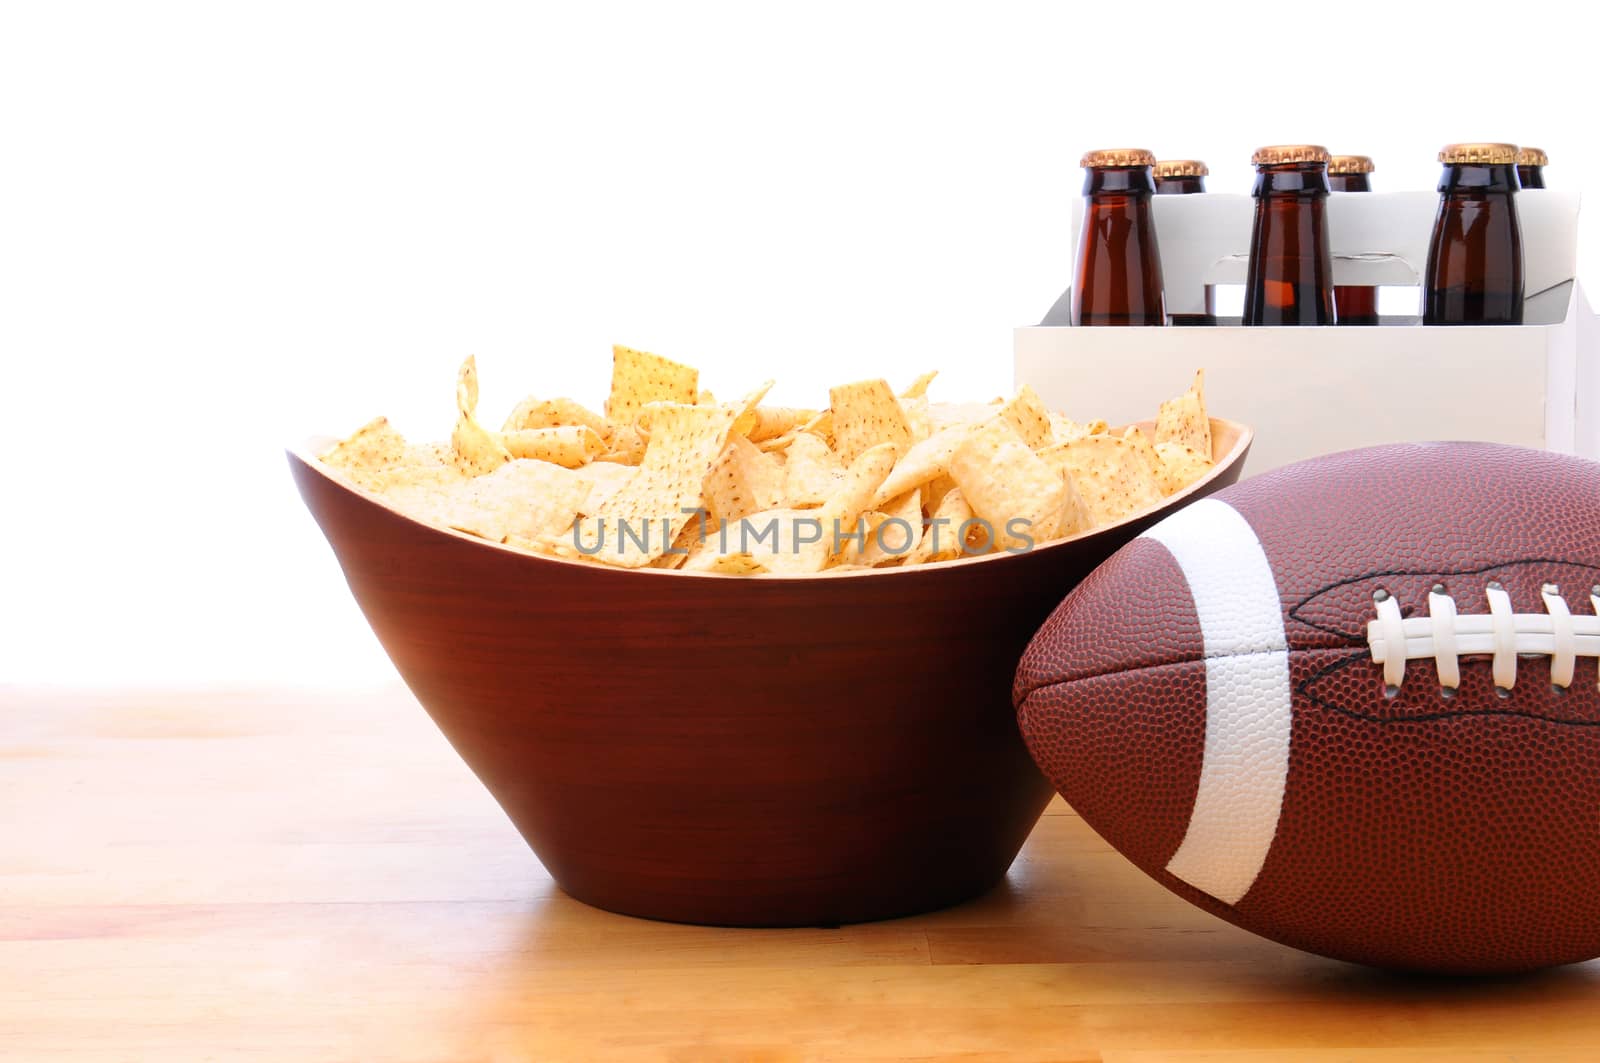 Chips, football and Six Pack of Beer on a table with a white background. Horizontal format.